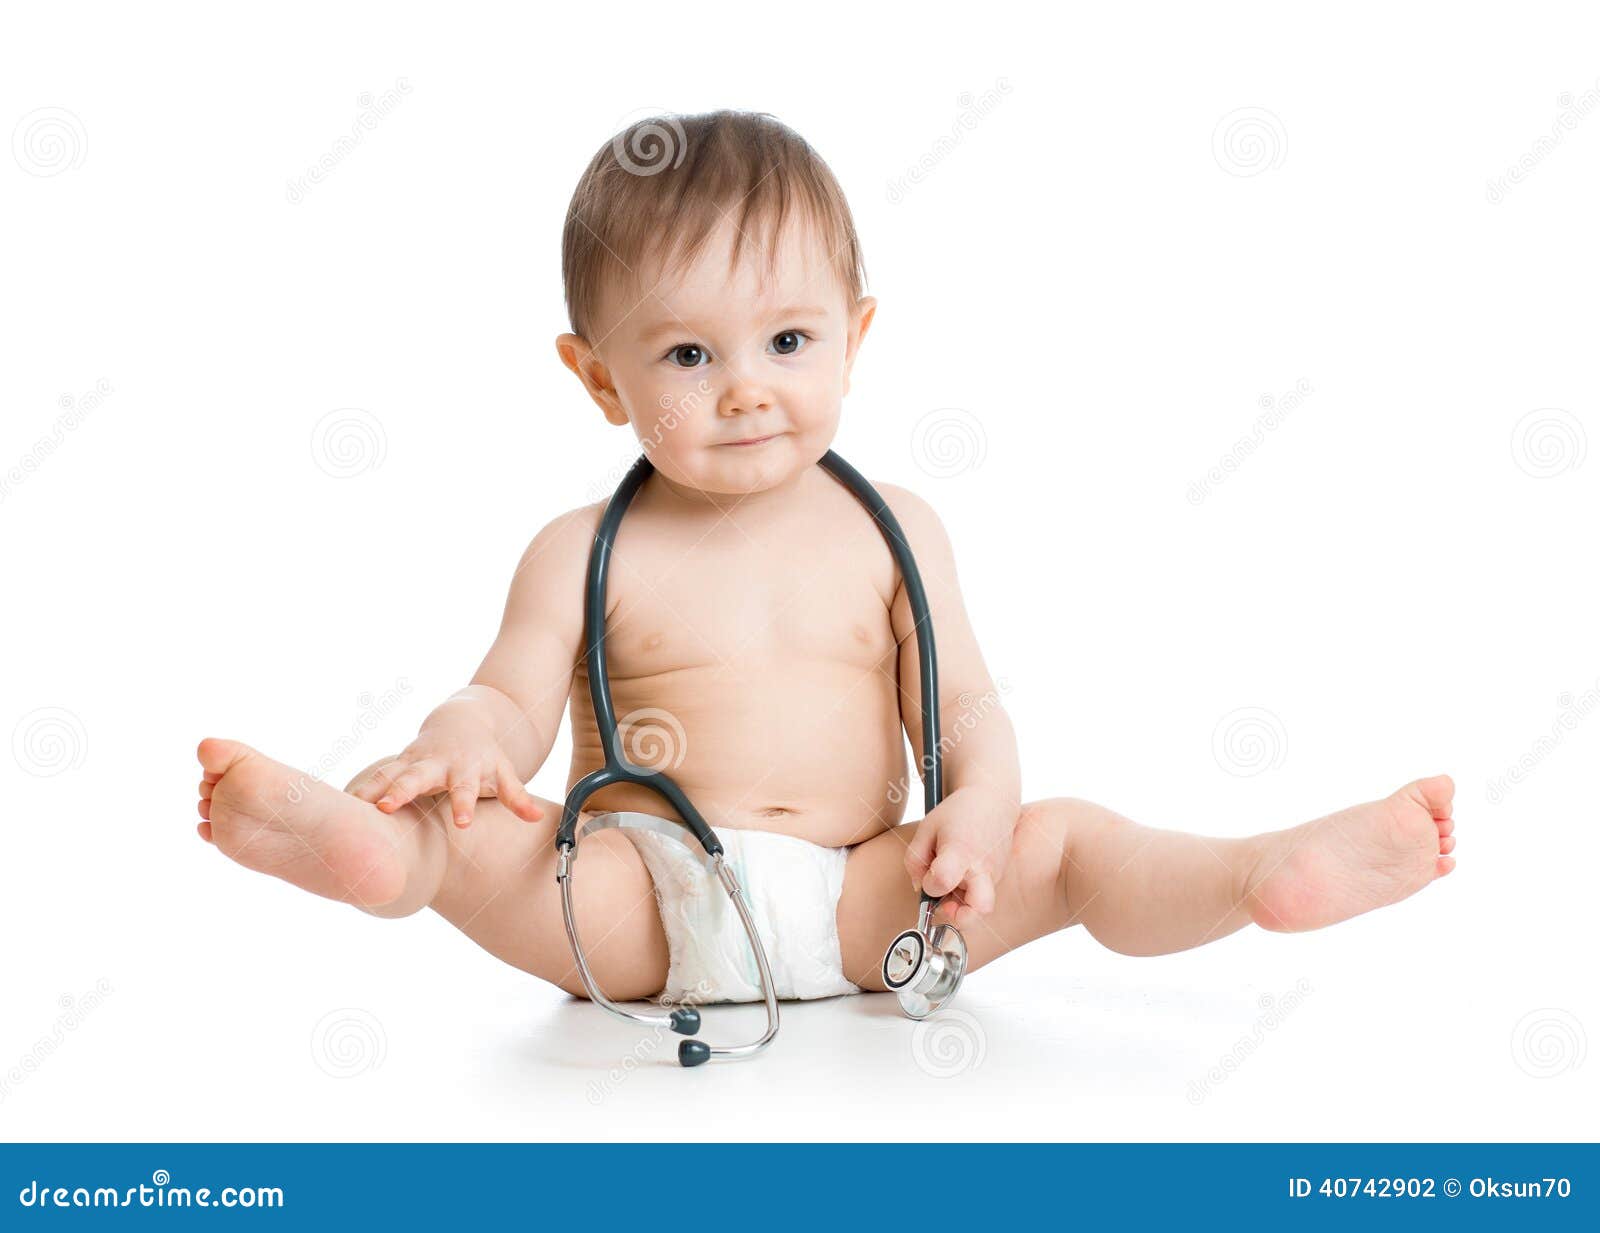 funny baby weared diaper with stethoscope